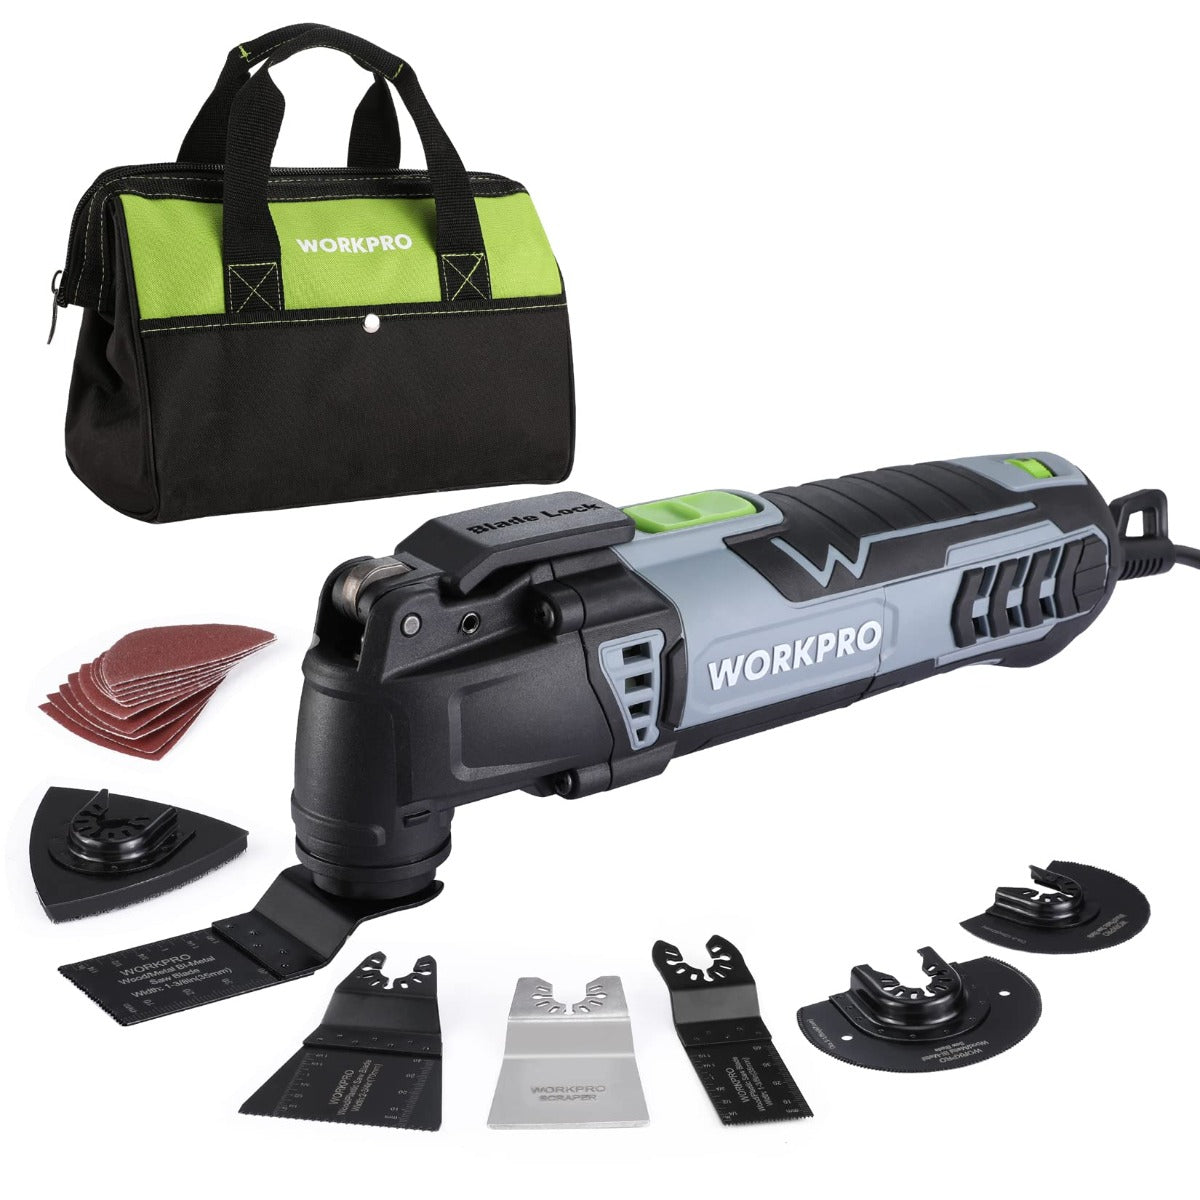 WORKPRO Oscillating Multi-Tool Kit, 3.0 Amp Corded Quick-Lock Replace